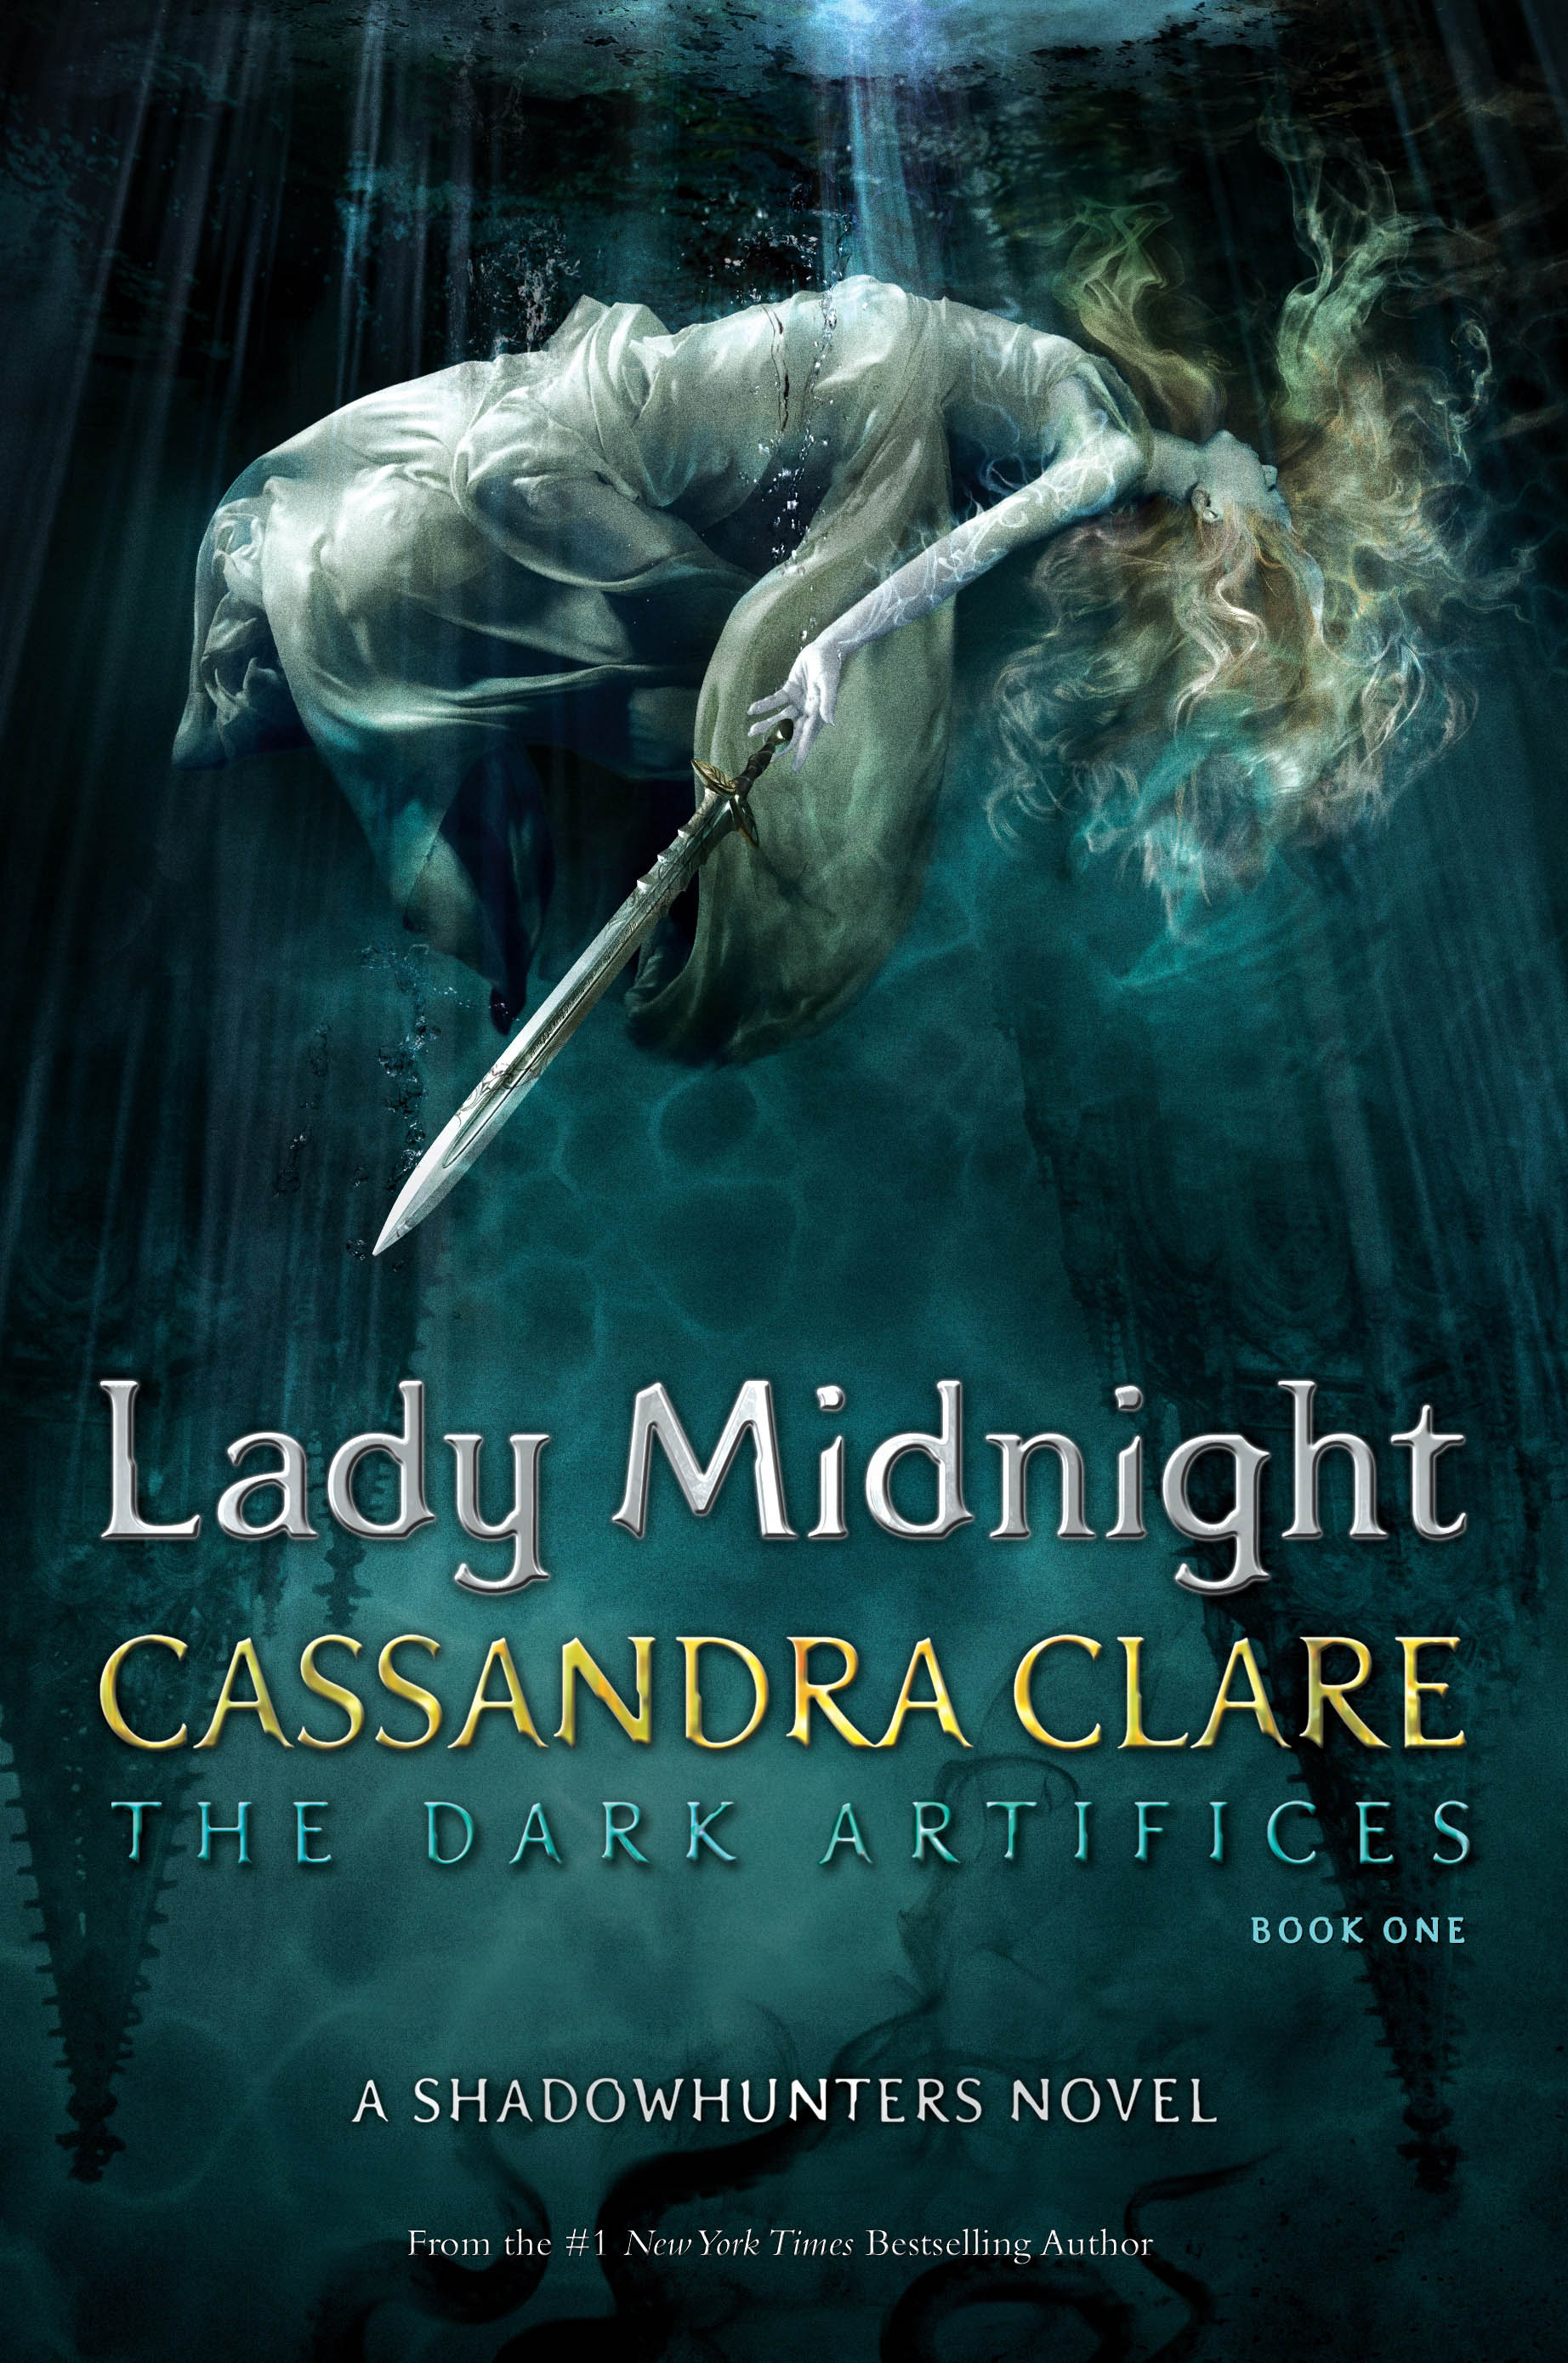 Image result for lady midnight